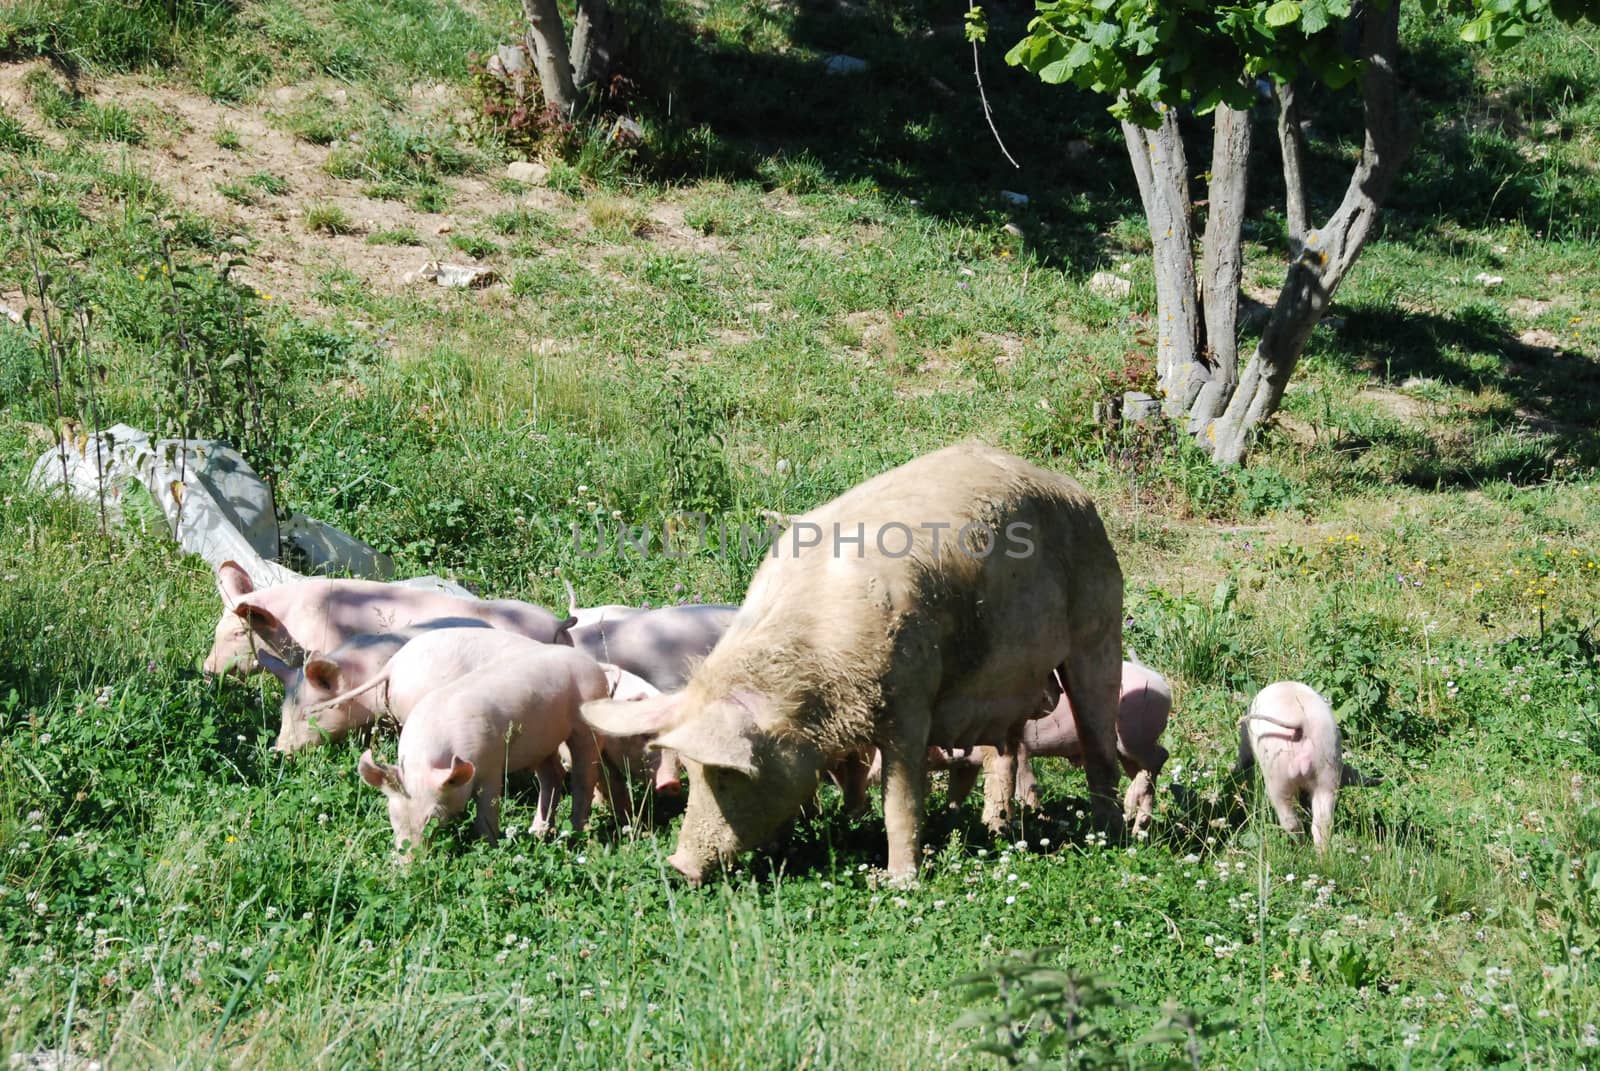 Some piglets looking for food